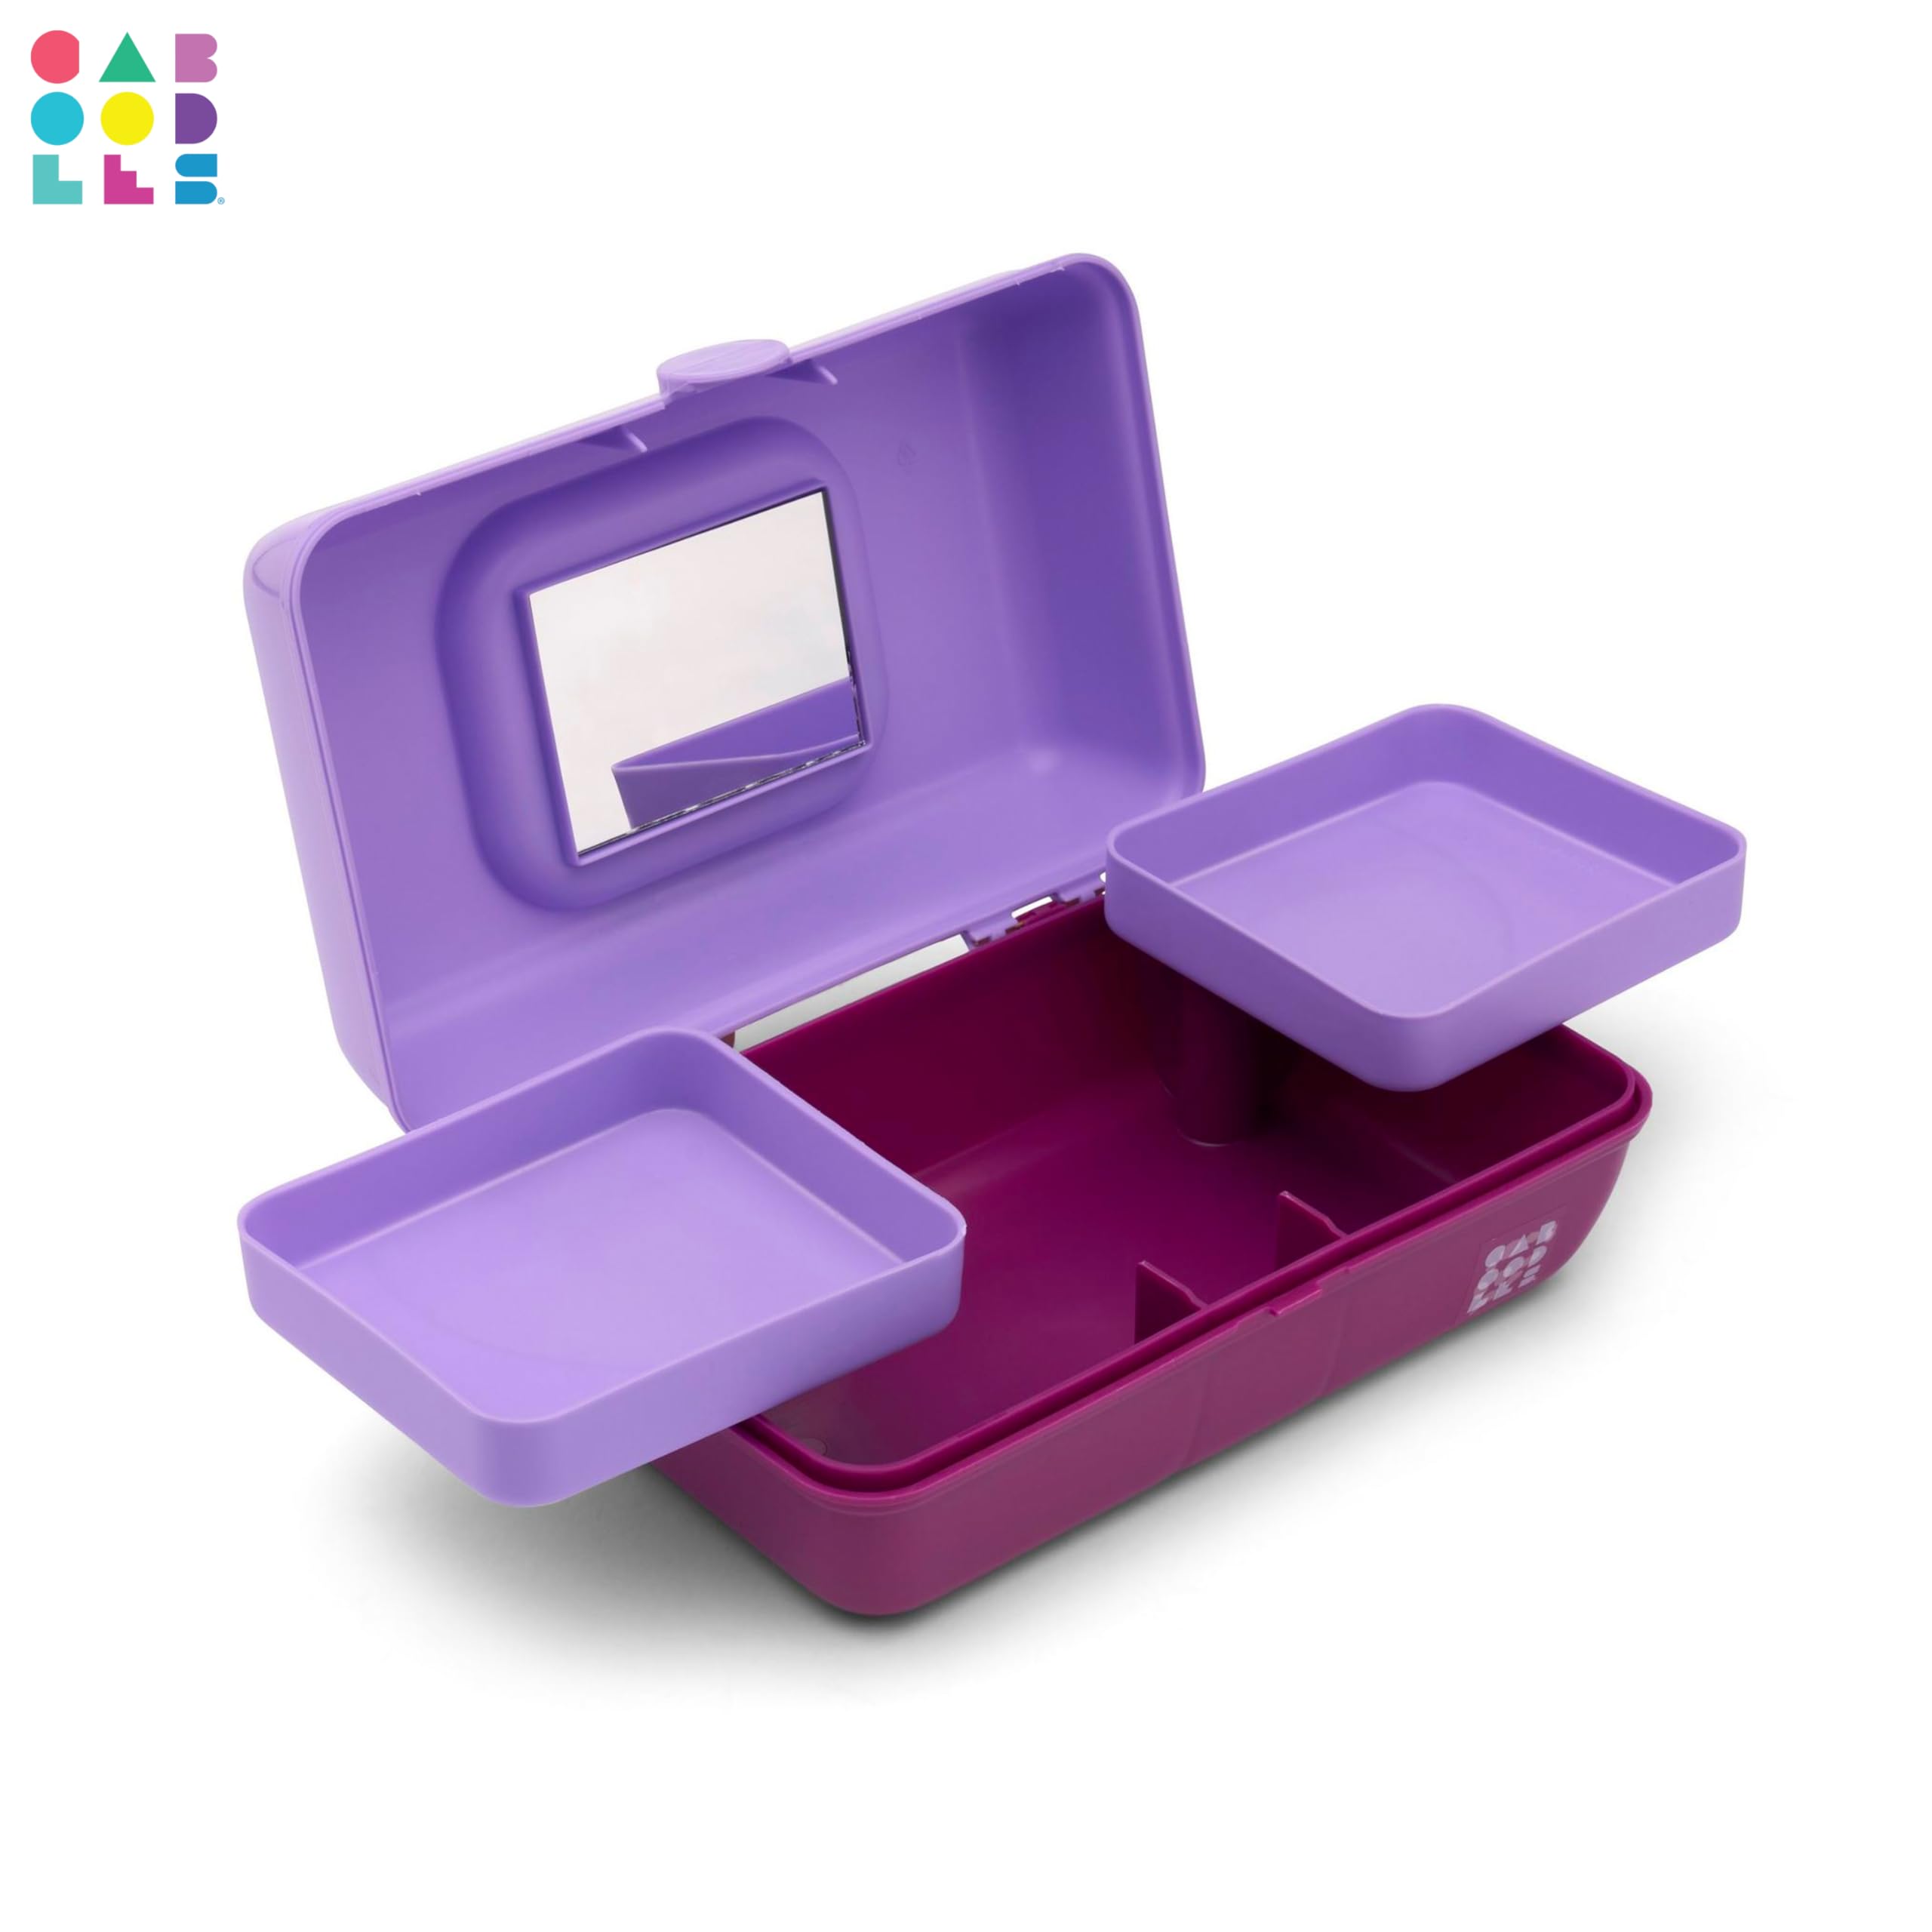 Caboodles Pretty in Petite Makeup Box, Two-Tone Lavender on Violet, Hard Plastic Organizer Box, 2 Swivel Trays, Fashion Mirror, Secure Latch for Safe Travel